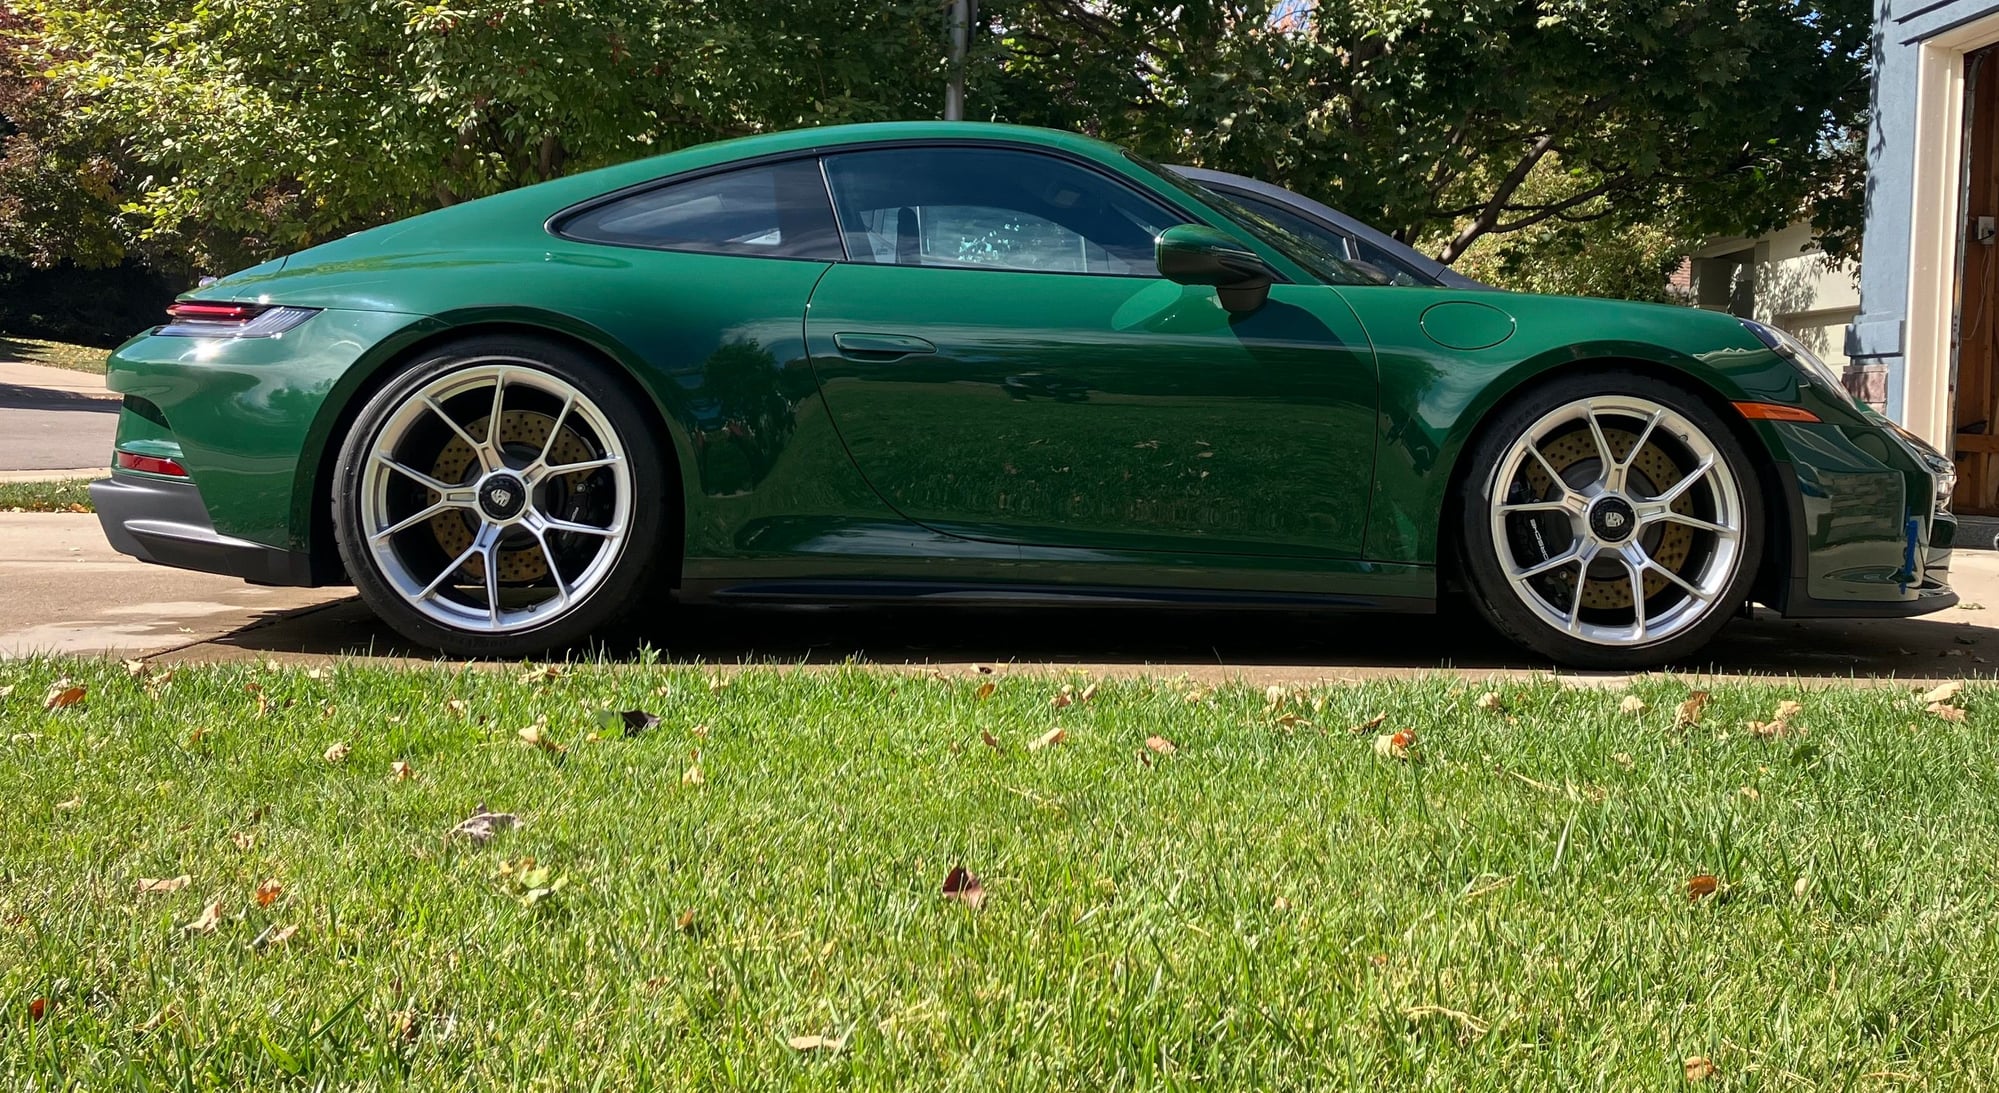 2022 Porsche 911 - 2022 Porsche 911 GT3 Touring in British Racing Green (PTS) - Used - Boulder, CO 80304, United States